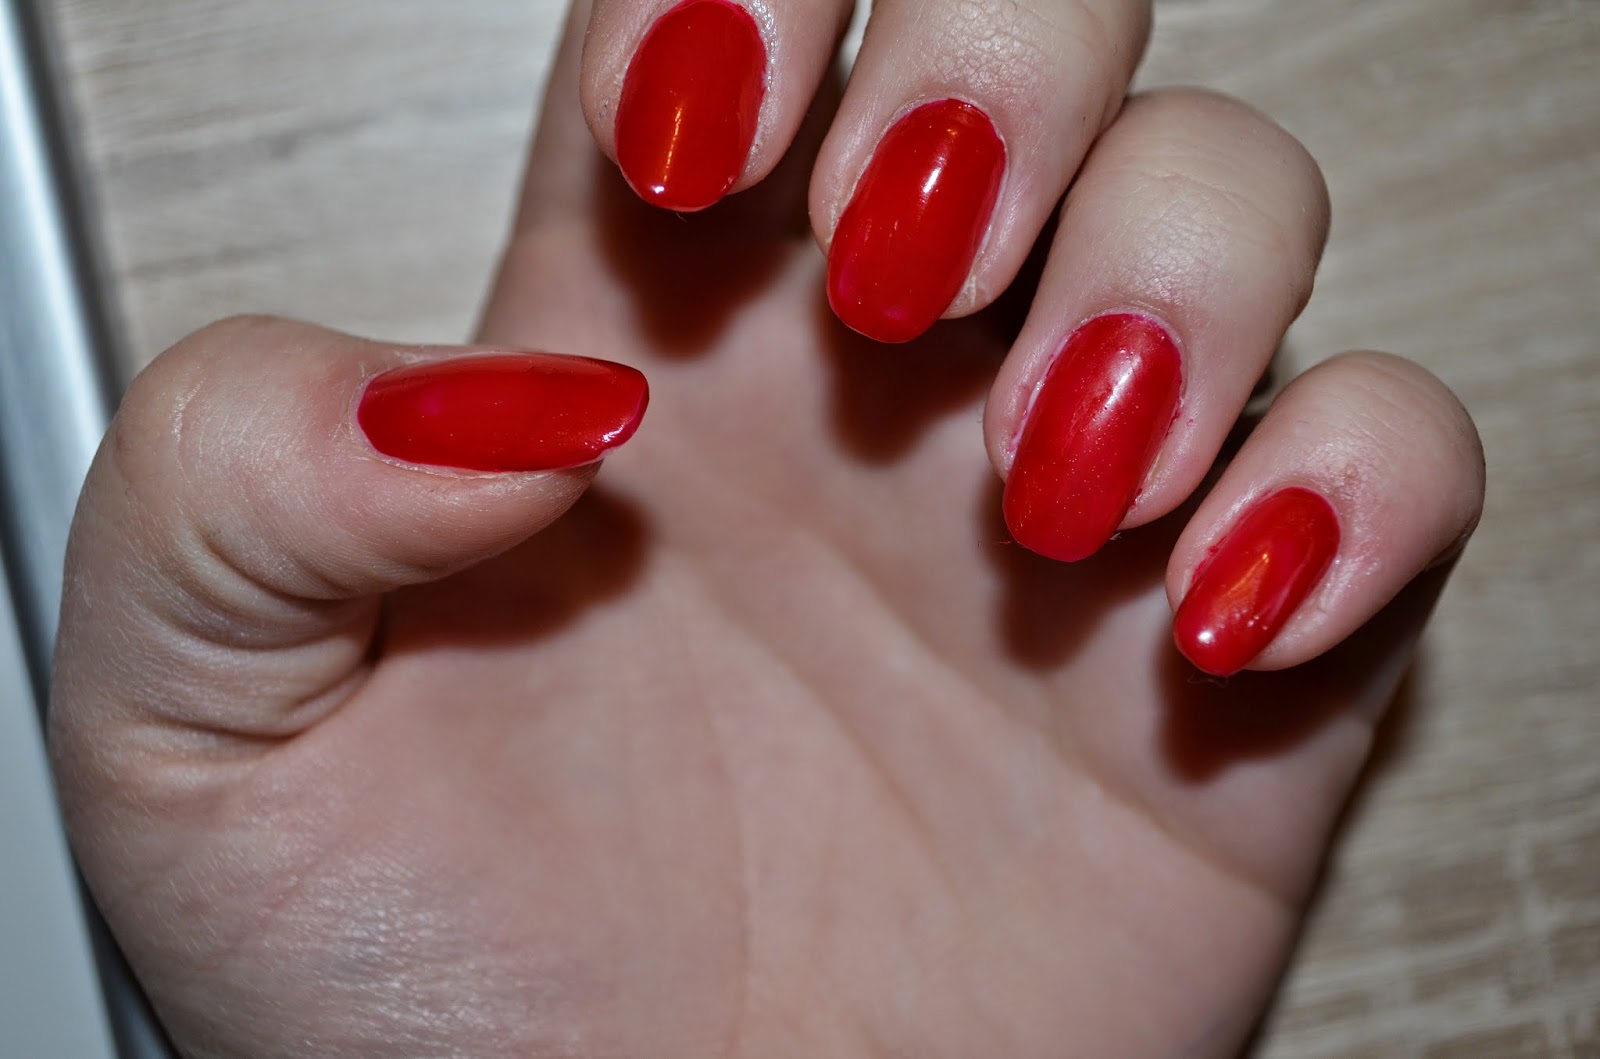 2. Essie Really Red - wide 8